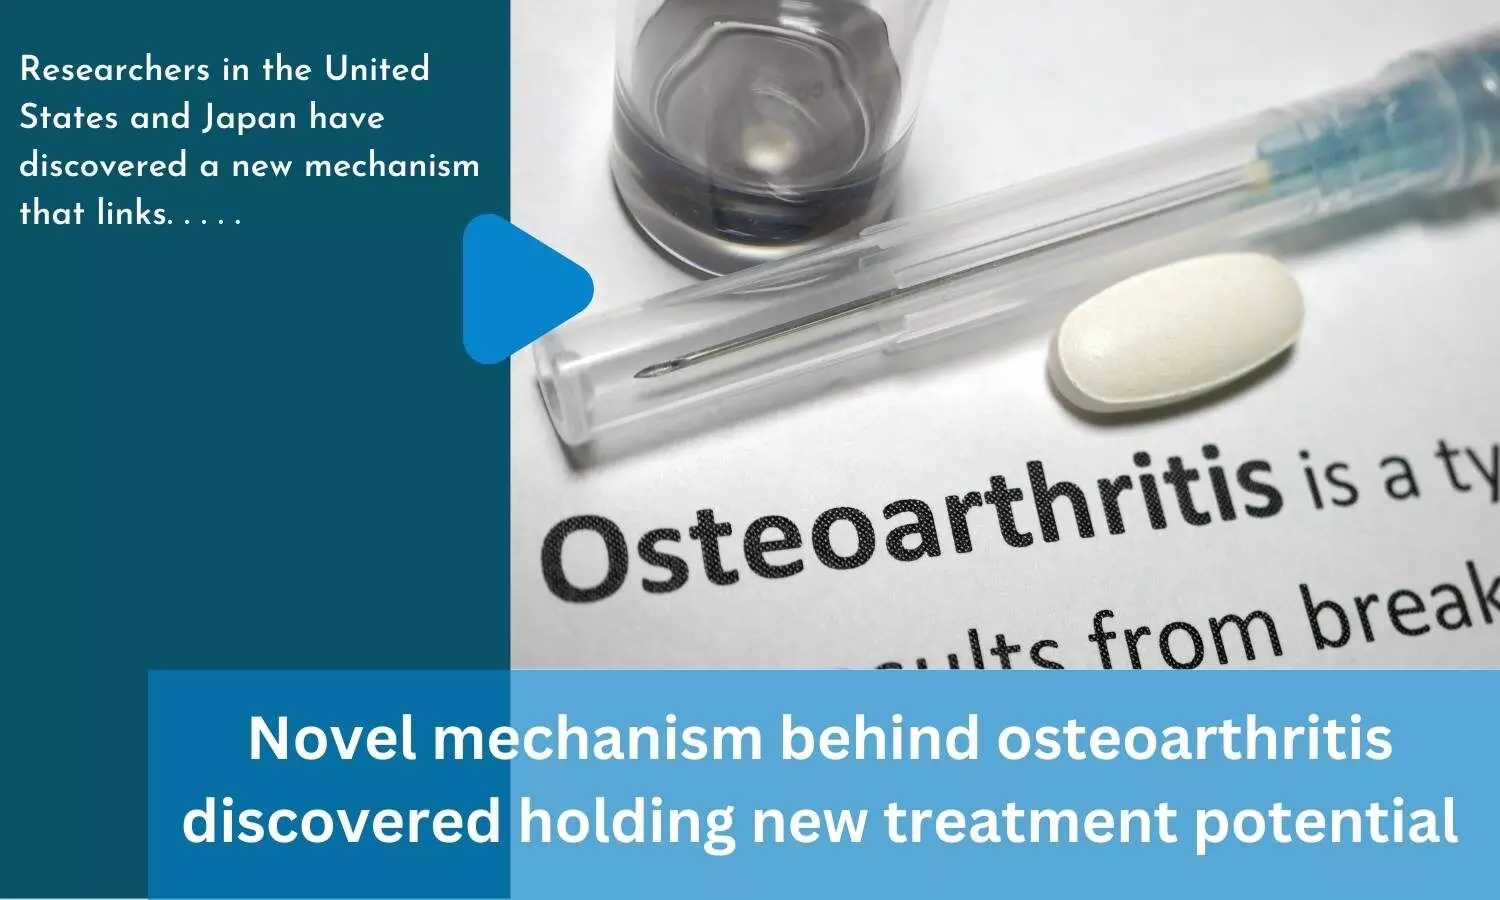 Novel mechanism behind osteoarthritis discovered holding new treatment potential